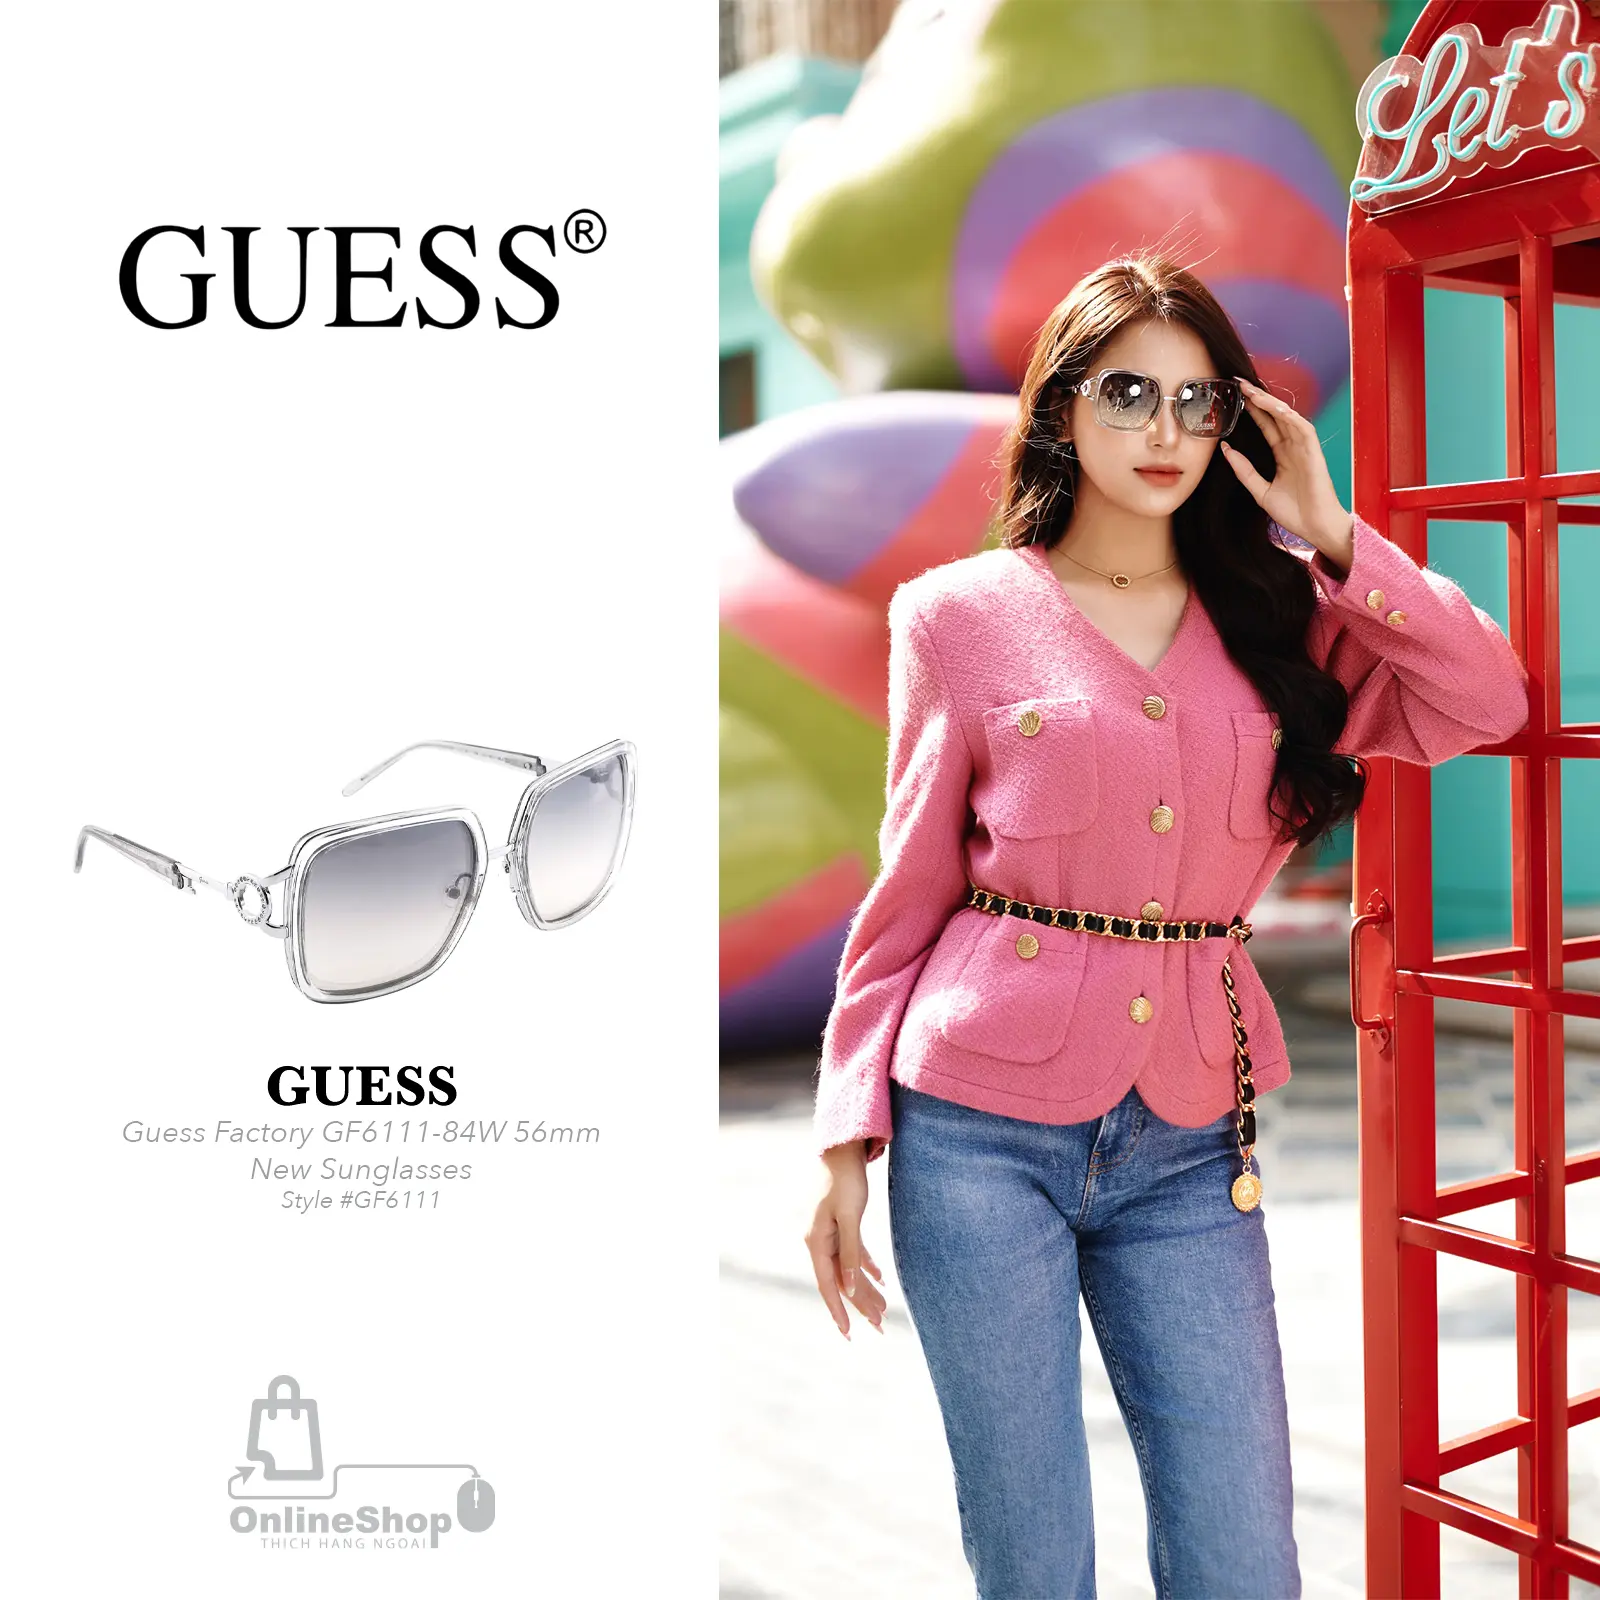 Guess Factory GF6111-84W 56mm New Sunglasses & Authentic-thich-hang-ngoai